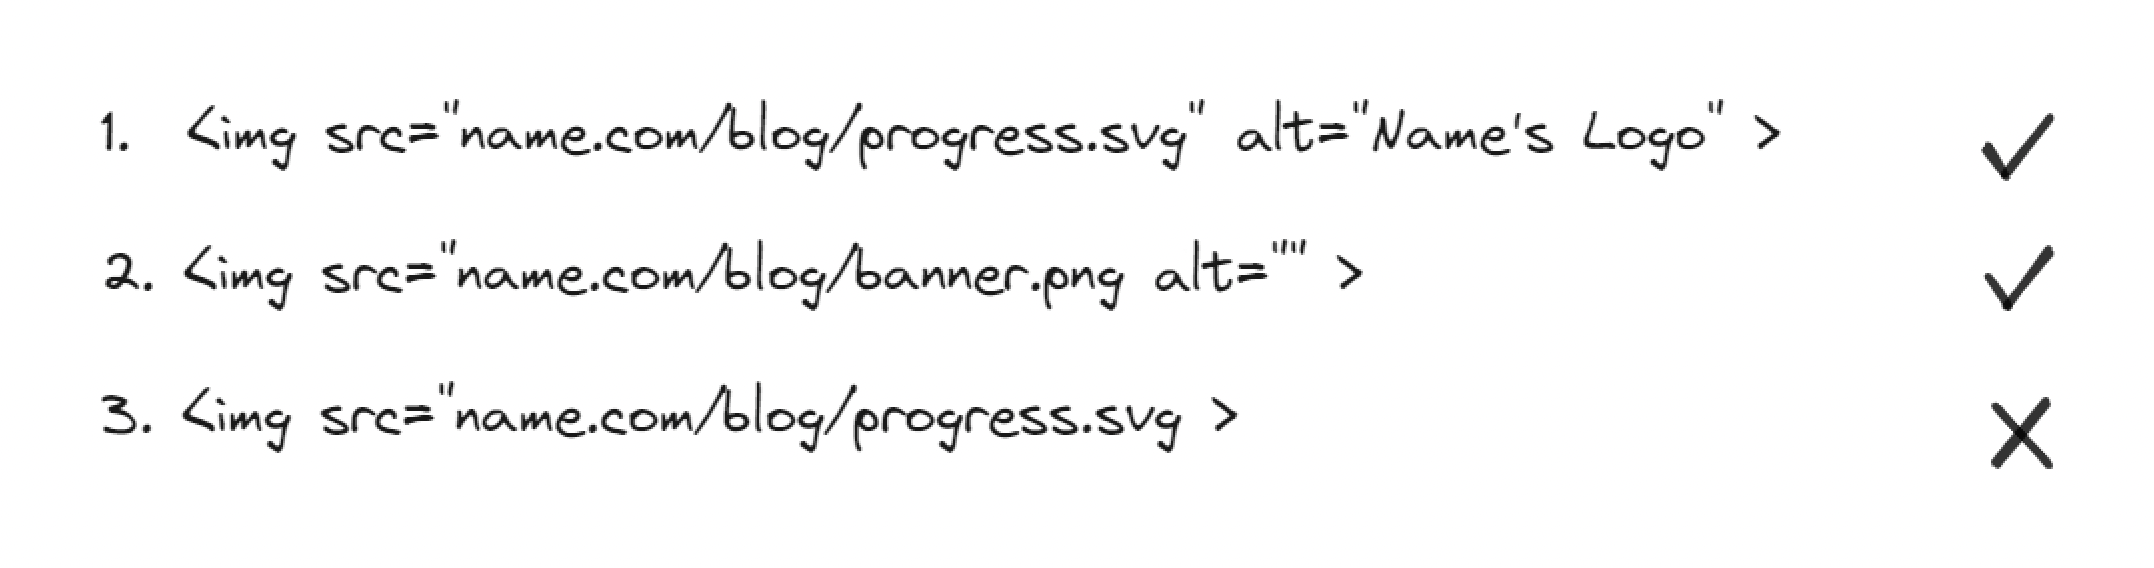 Three HTML image element examples. The first example points to a file called 'progress.svg' located on name.com, and has an alt attribute value of 'Name's logo'. After it is a checkmark icon. The second example points to a file called 'banner.png', and has an empty/nulled alt attribute. After it is a checkmark icon. The third example points to a file called 'progress.svg', and has no alt attribute. After it is an X icon.